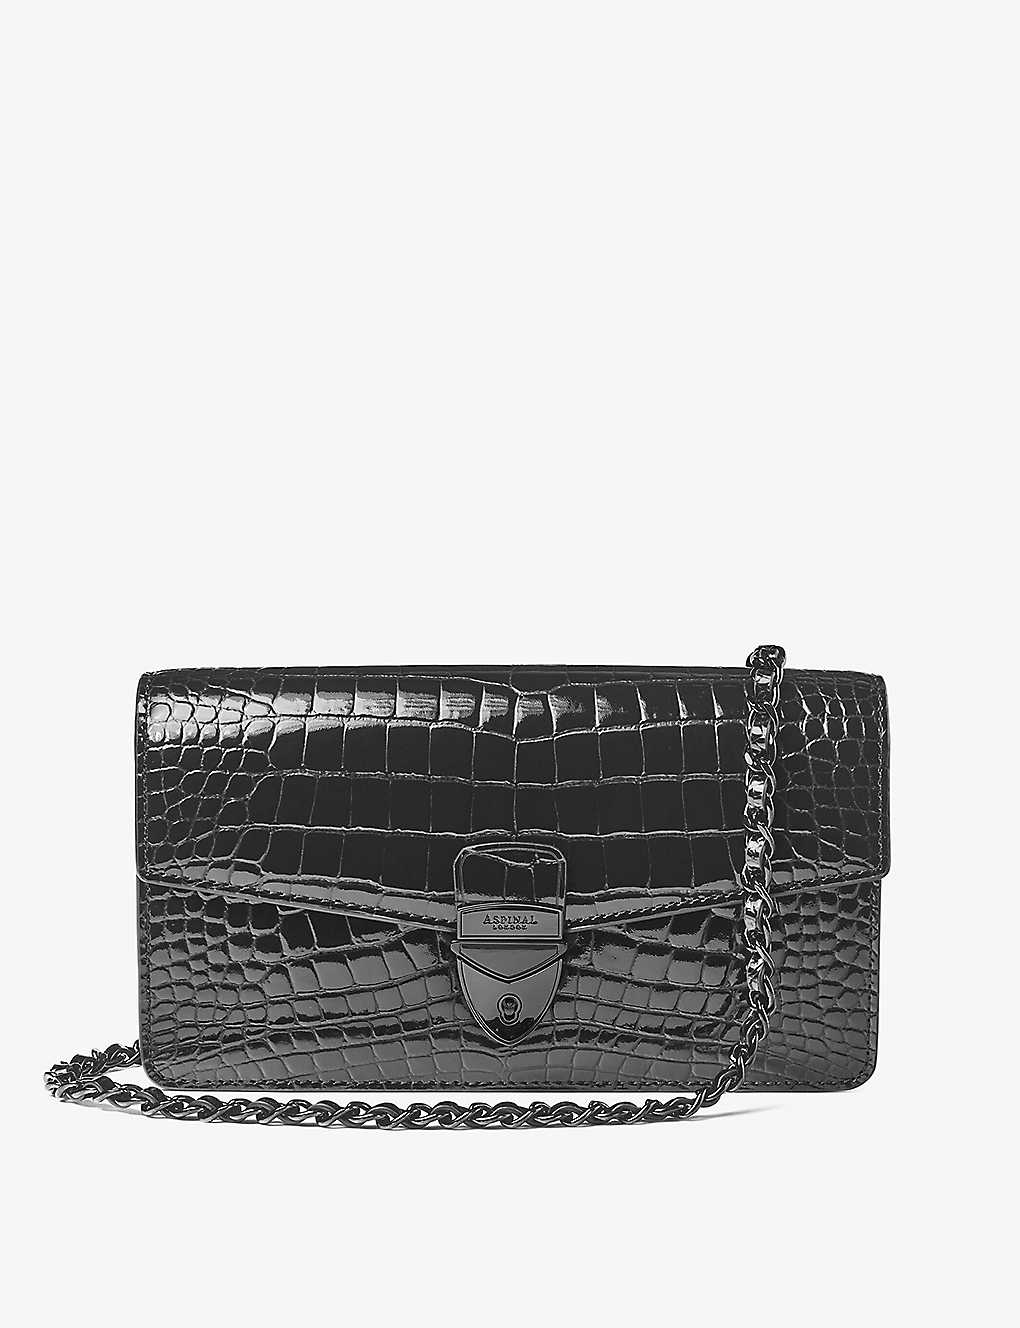 Aspinal Of London Womens Black Mayfair 2 Croc-effect Leather Clutch Bag